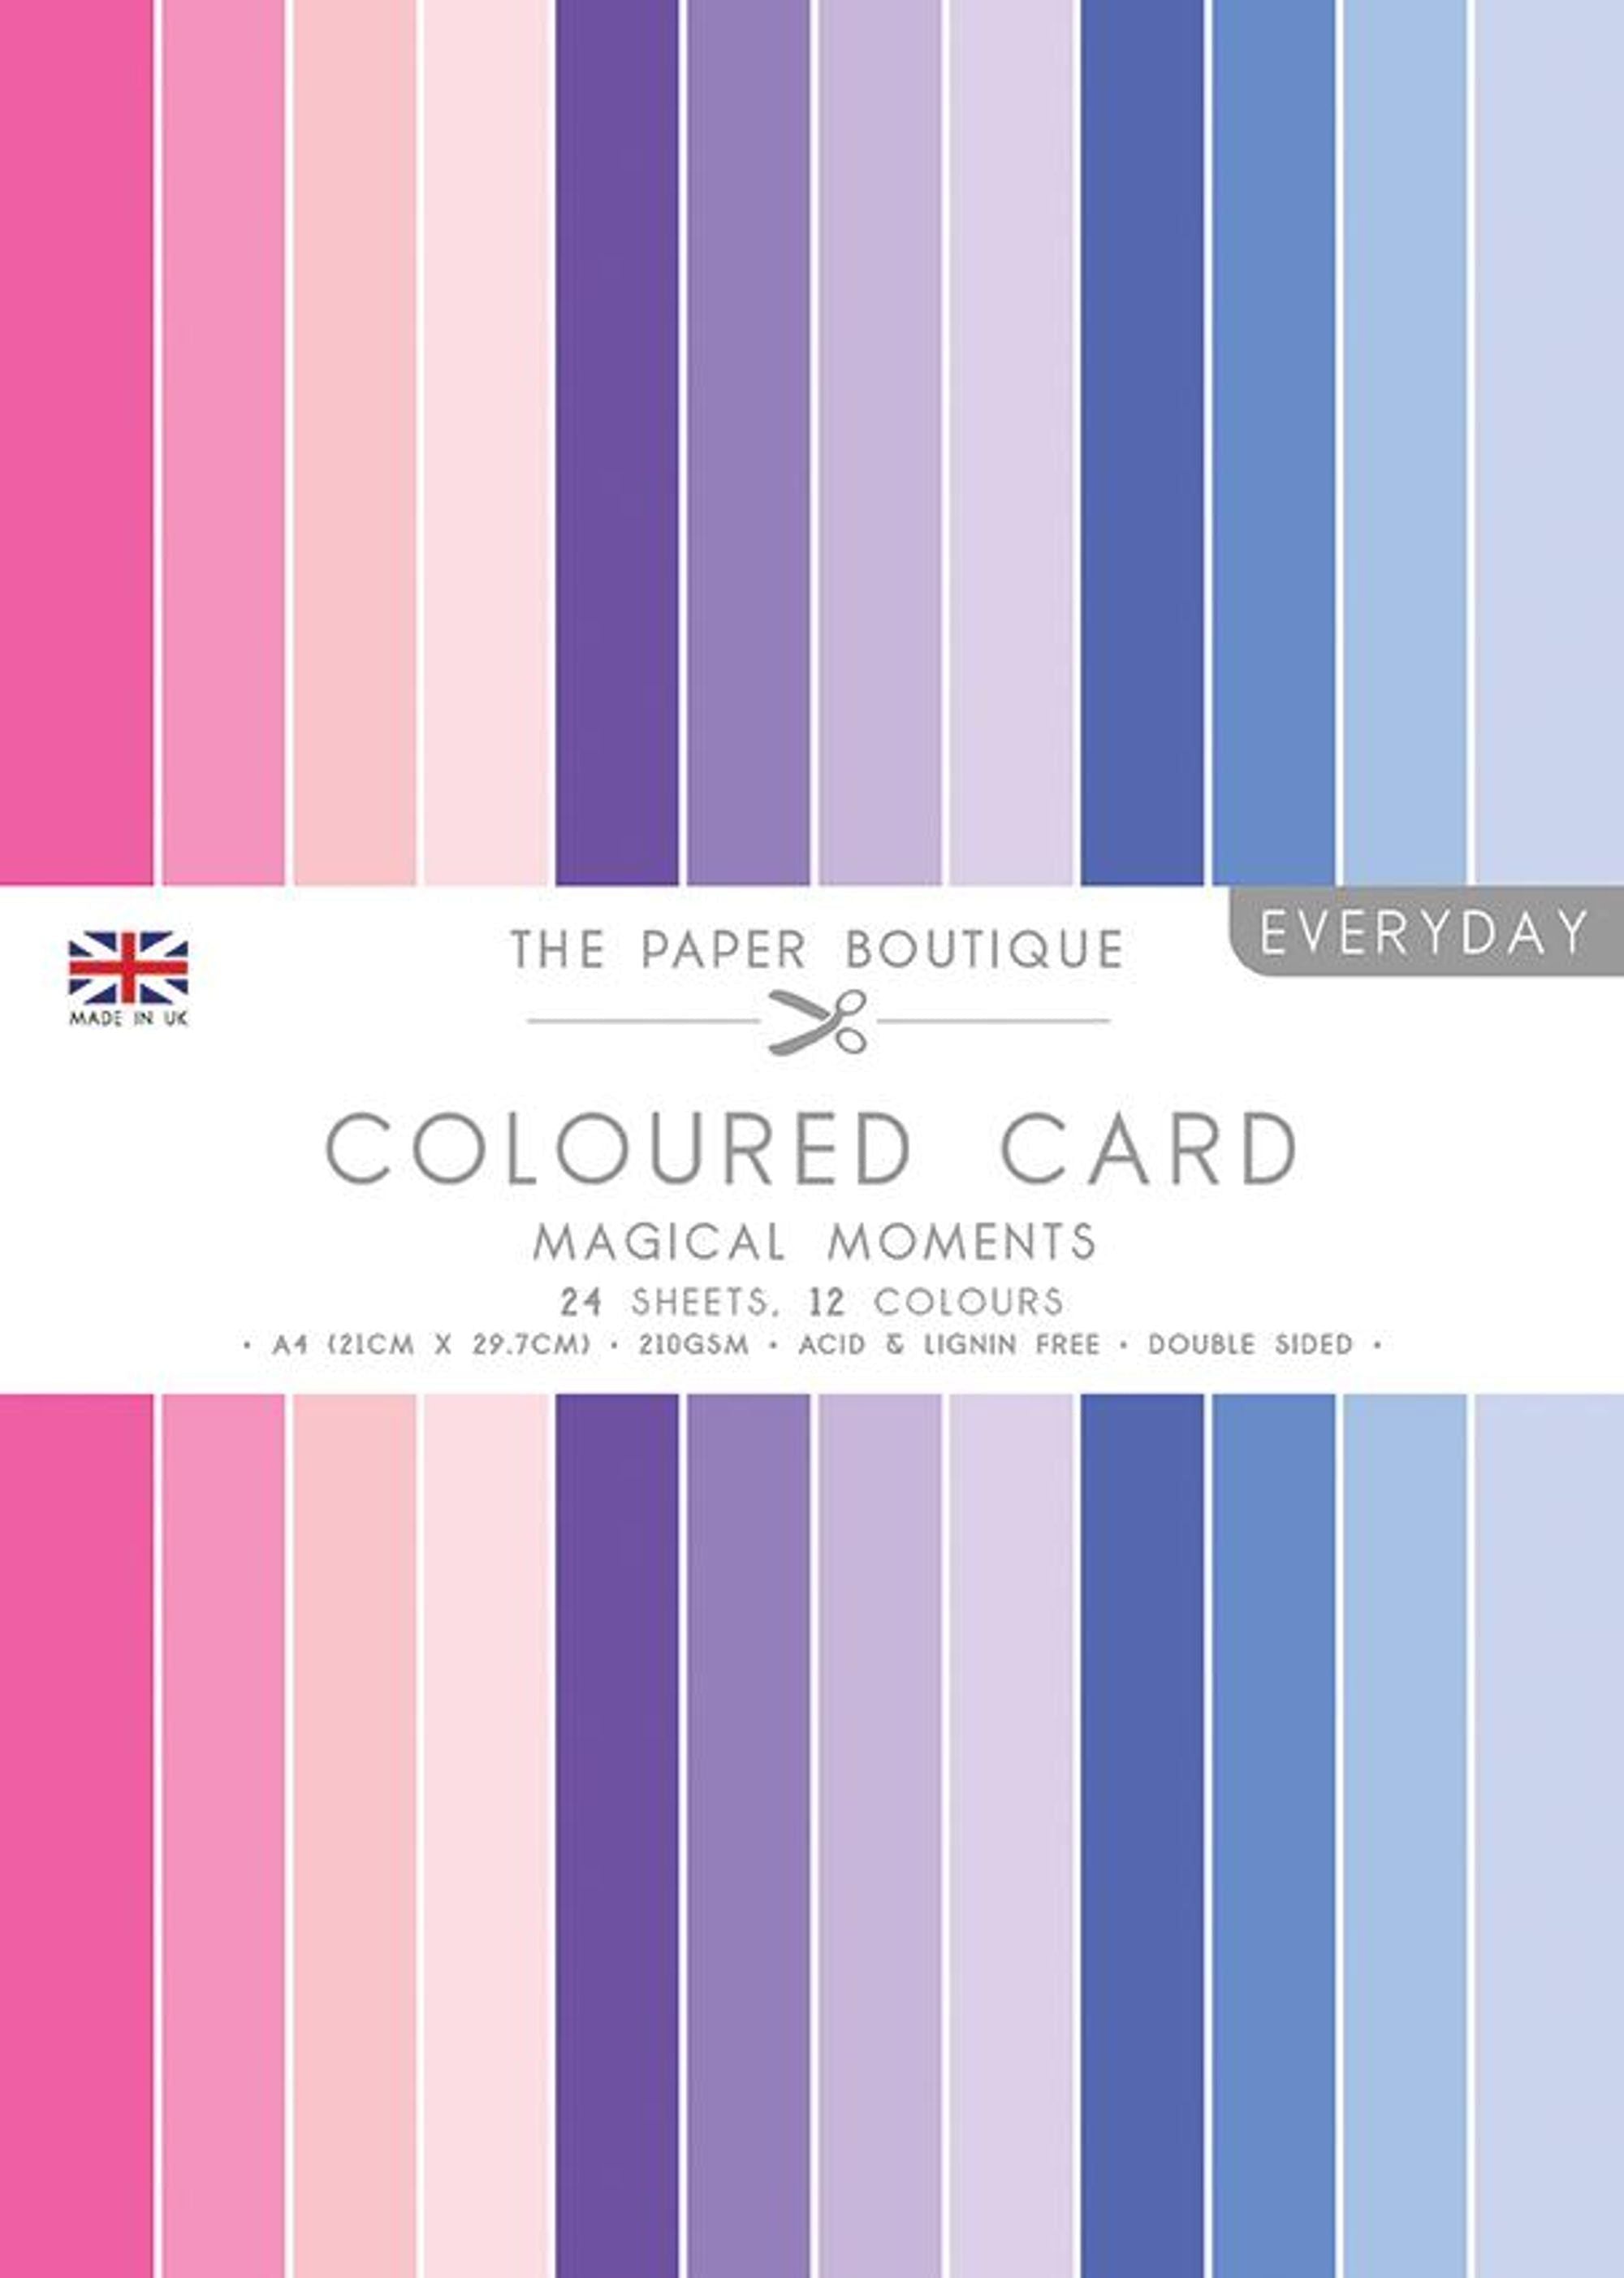 The Paper Boutique Everyday - Coloured Card - Magical Moments A4